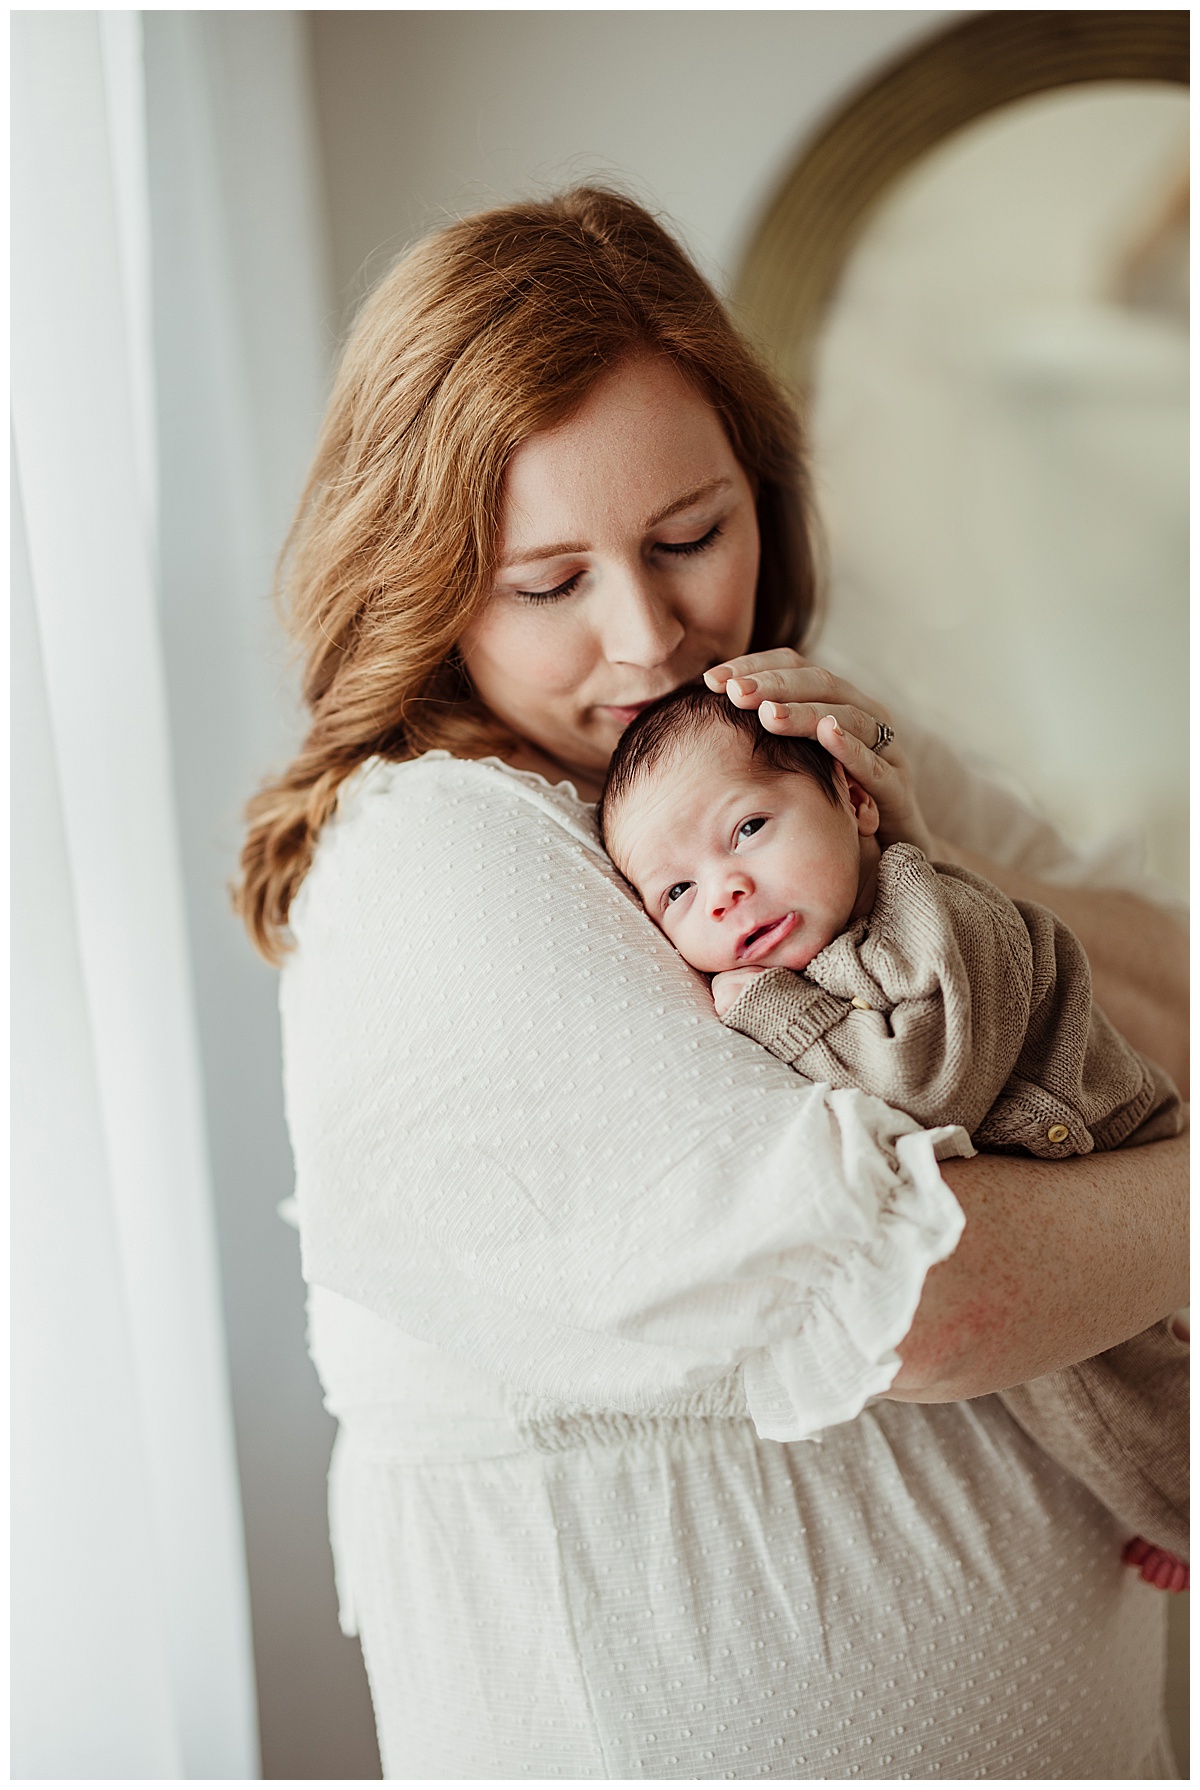 Mom and baby cuddle together for Norma Fayak Photography